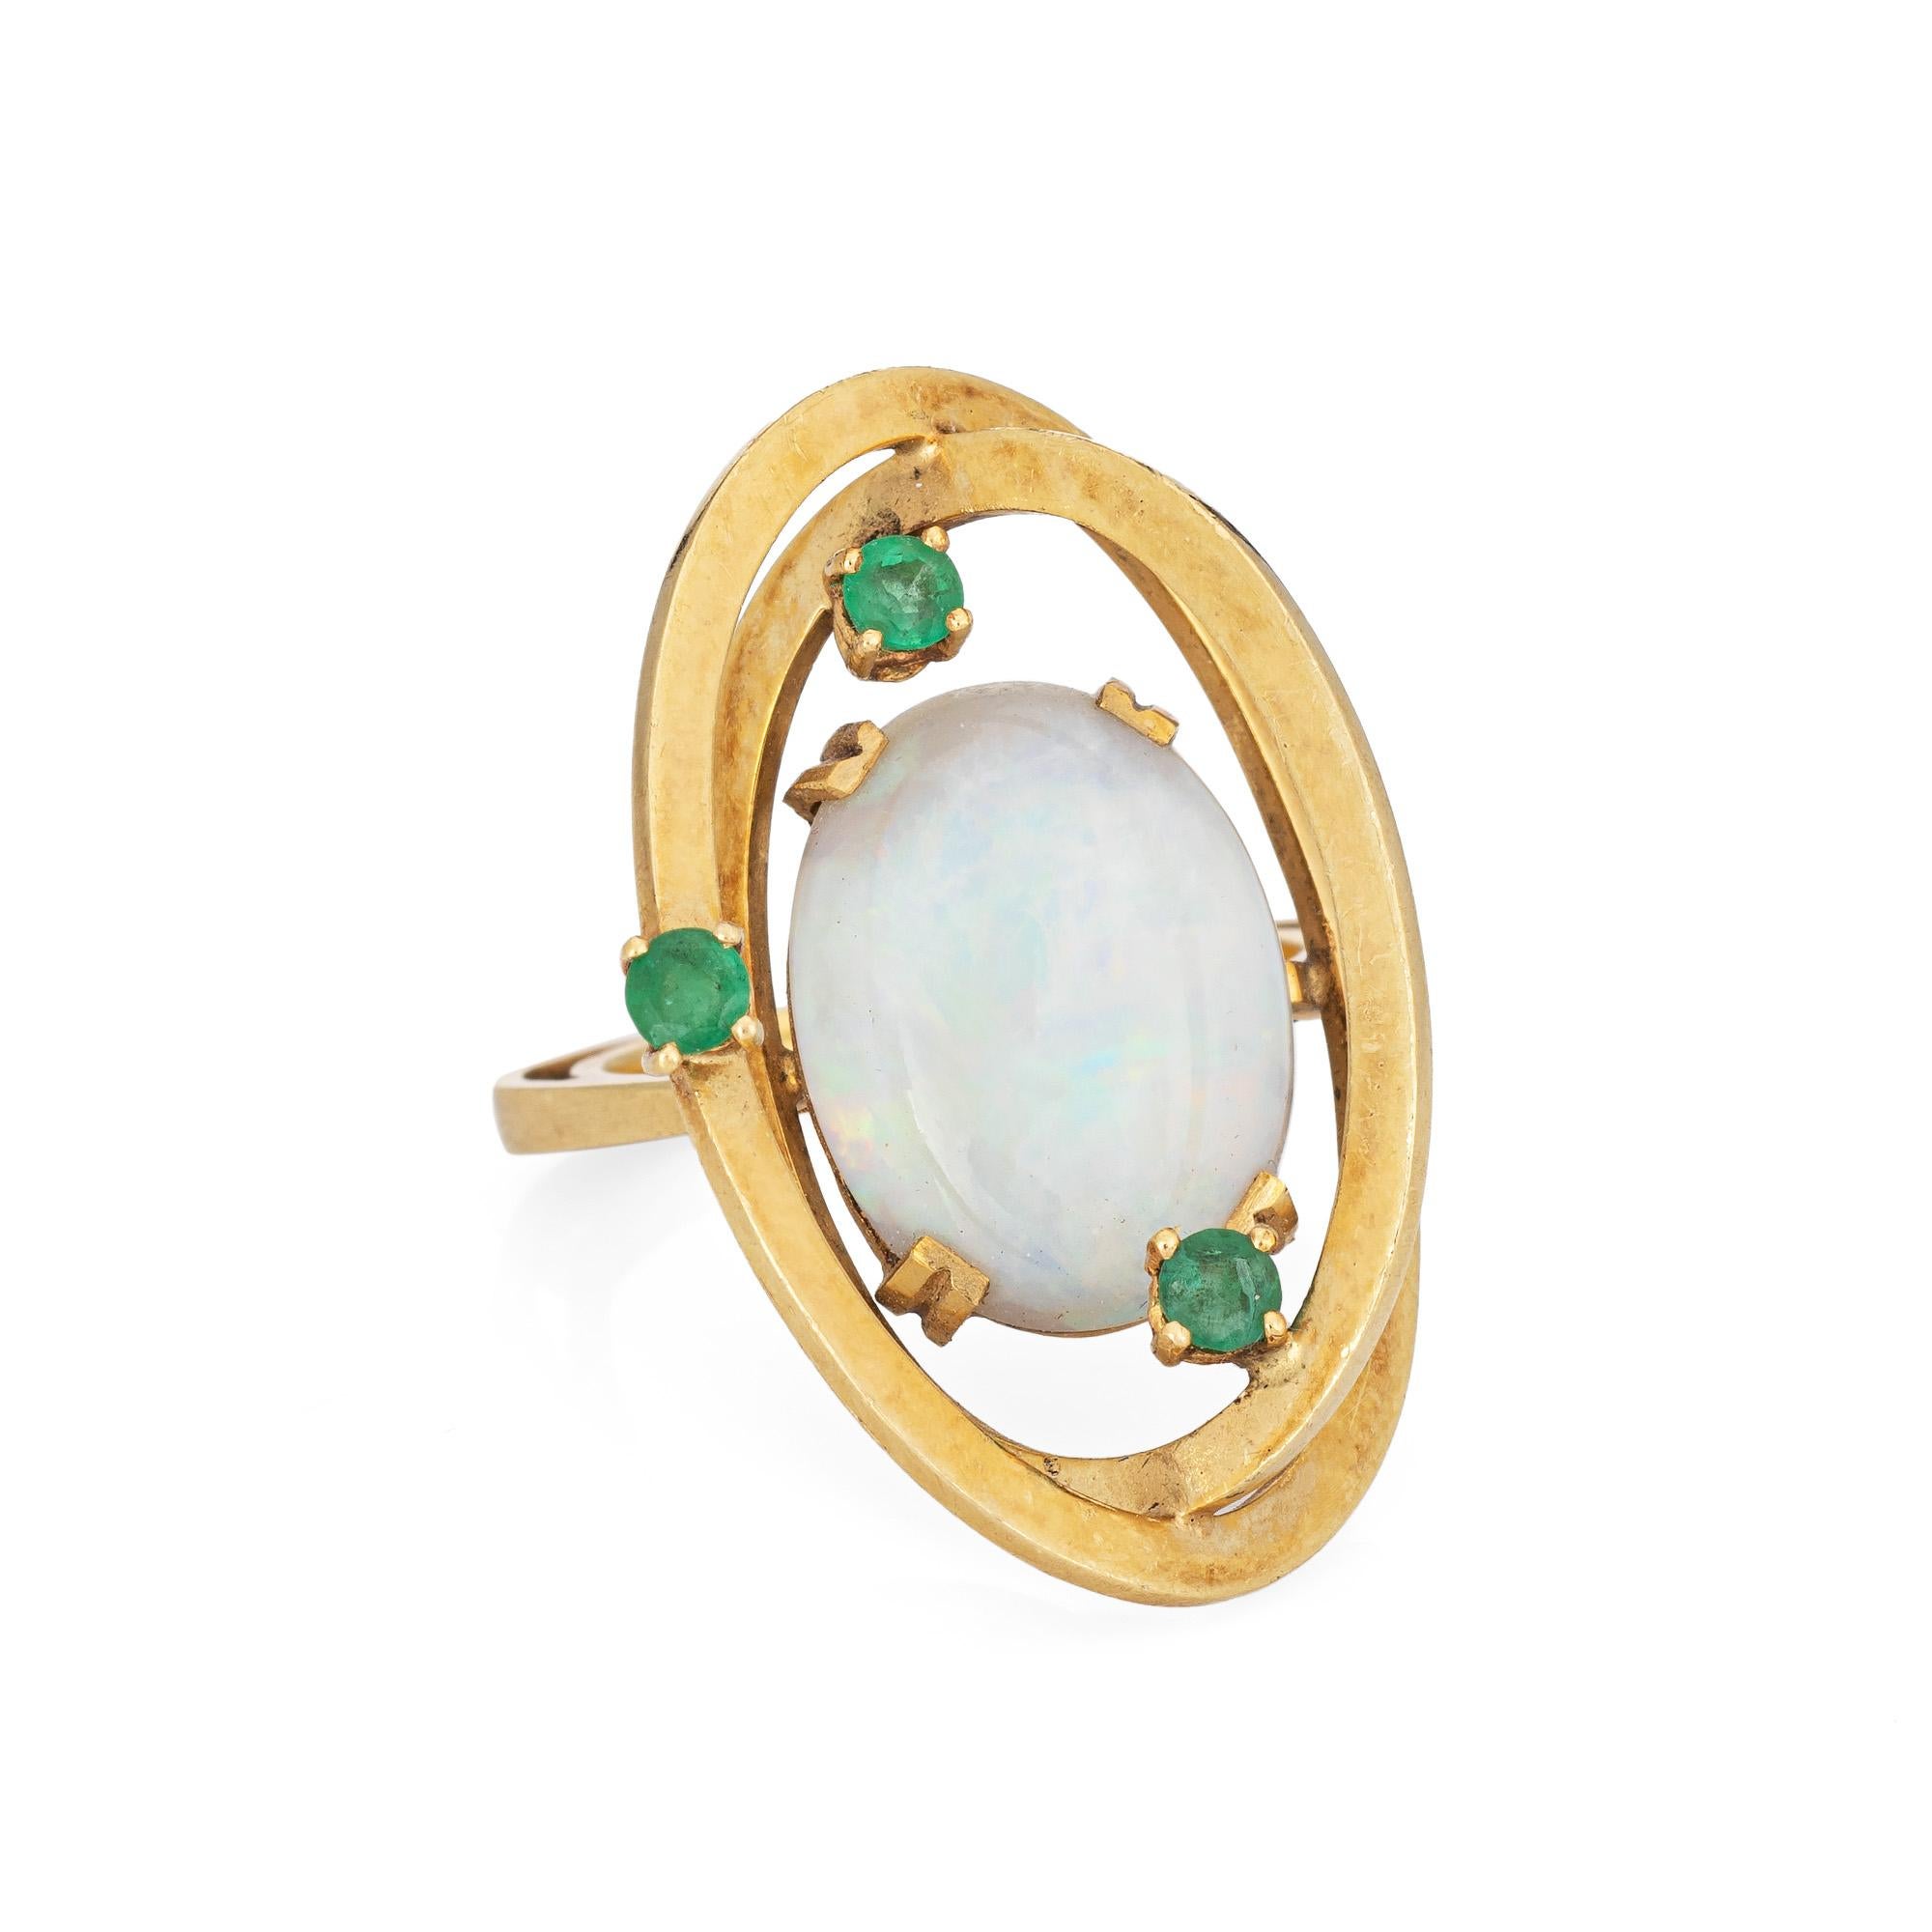 Stylish vintage opal & emerald cocktail ring crafted in 18 karat yellow gold (circa 1960s to 1970s). 

The center opal measures 16mm x 12mm (estimated at 4 carats), accented with three estimated 0.03 carat emeralds.  The opals is in very good